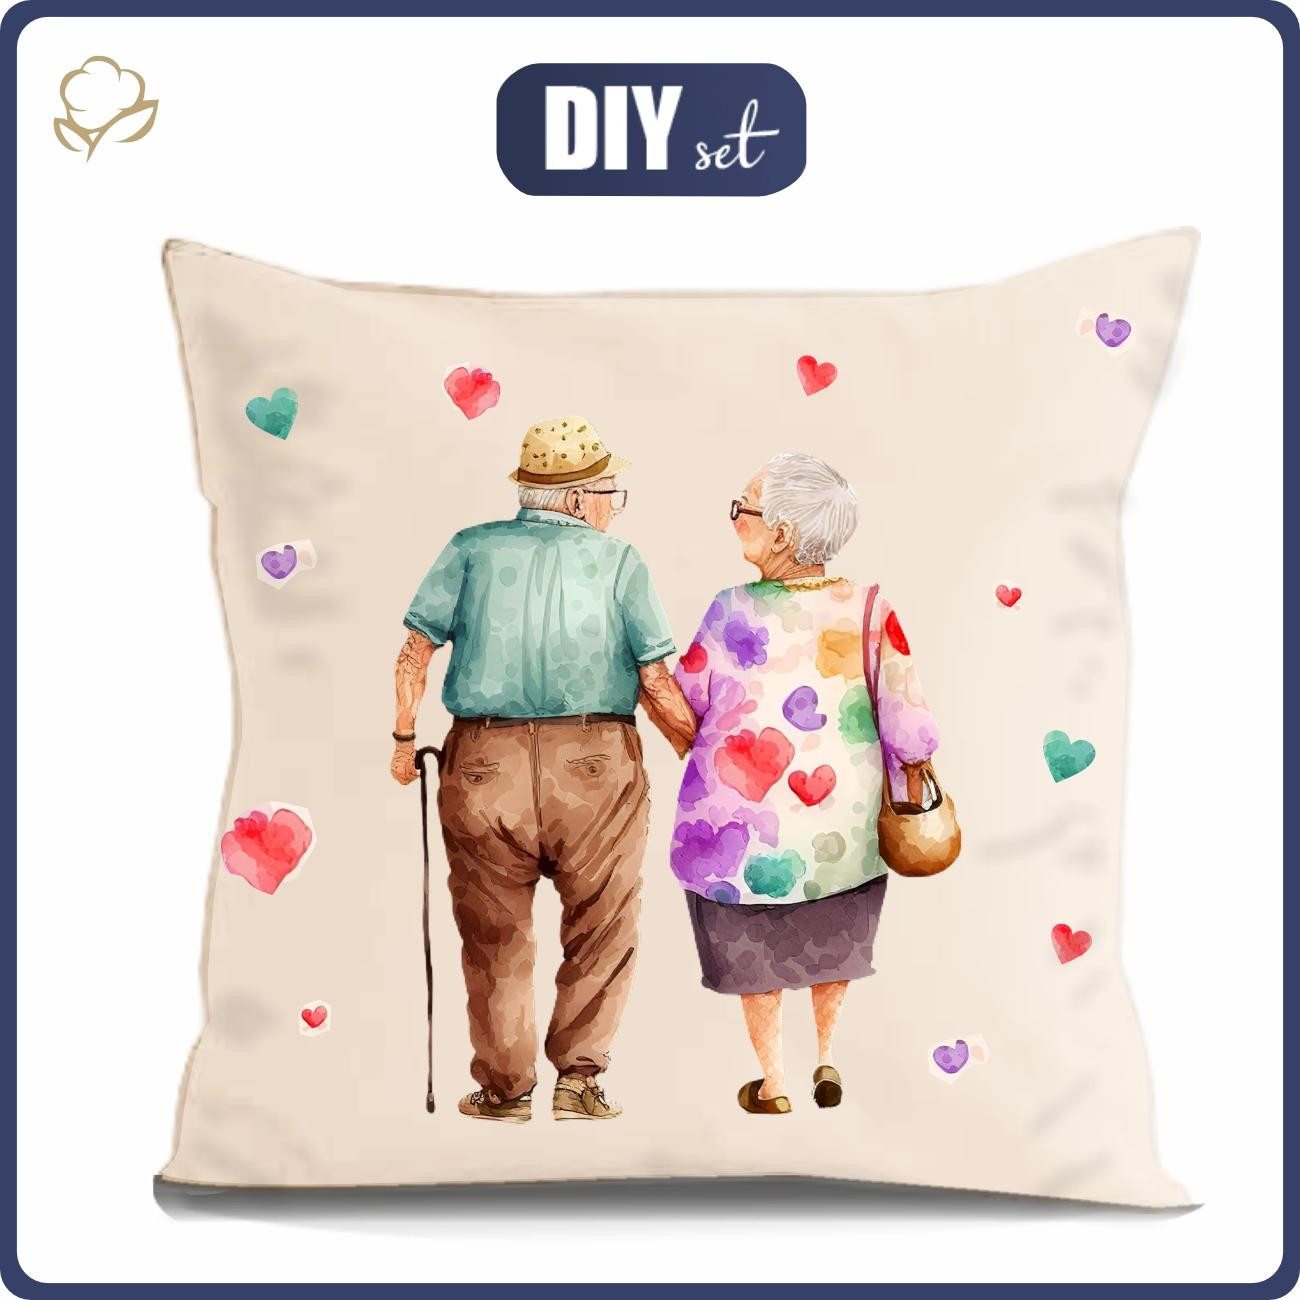 PILLOW 45X45 - GRANDPARENTS / colorful hearts - sewing set